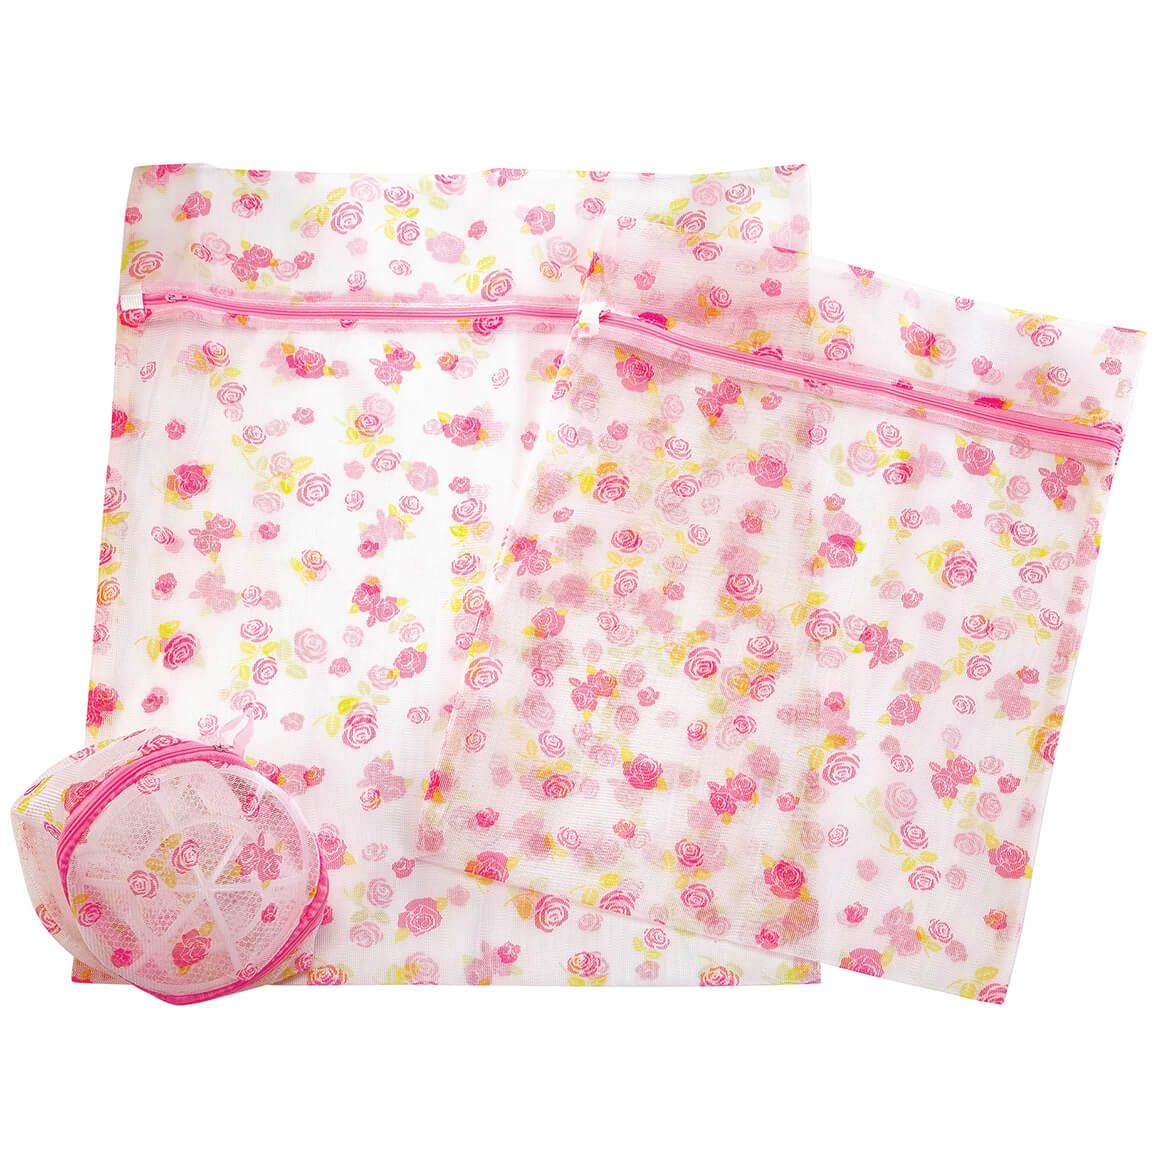 Roses Laundry Bags, Set of 3 + '-' + 376362